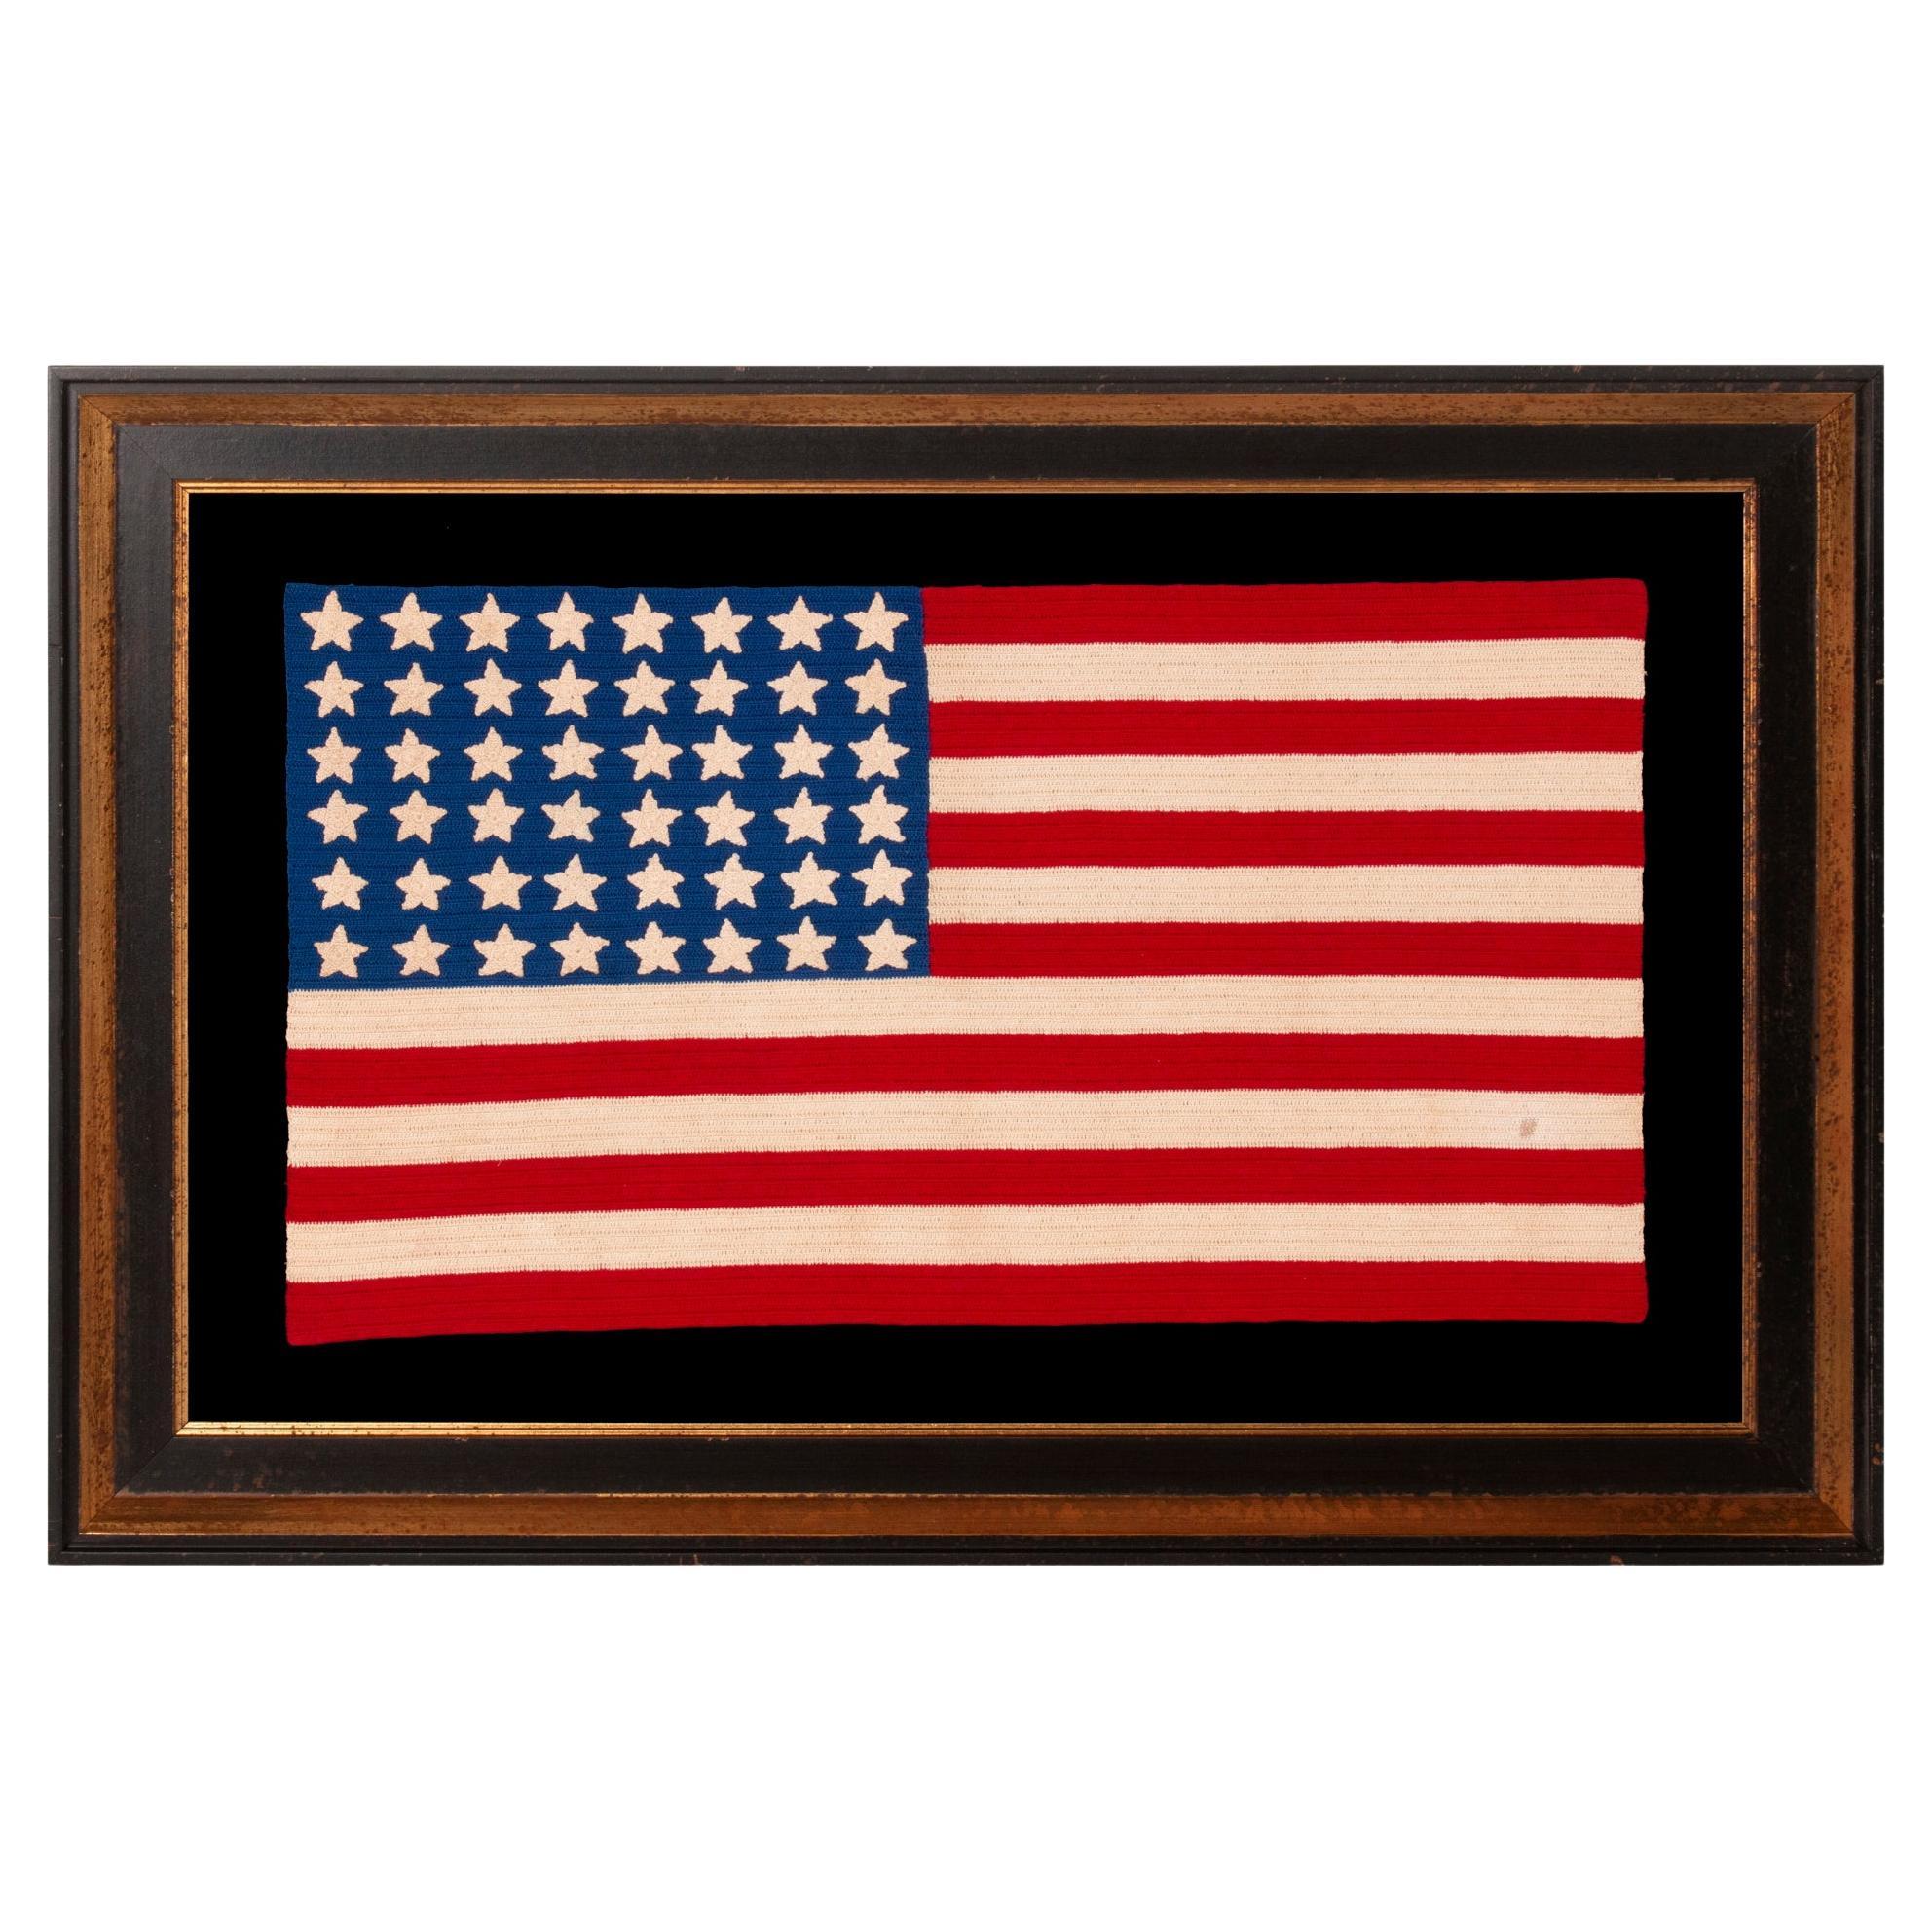 48 Star Crocheted American Flag, With Beautiful Striking Colors, ca 1941-1945